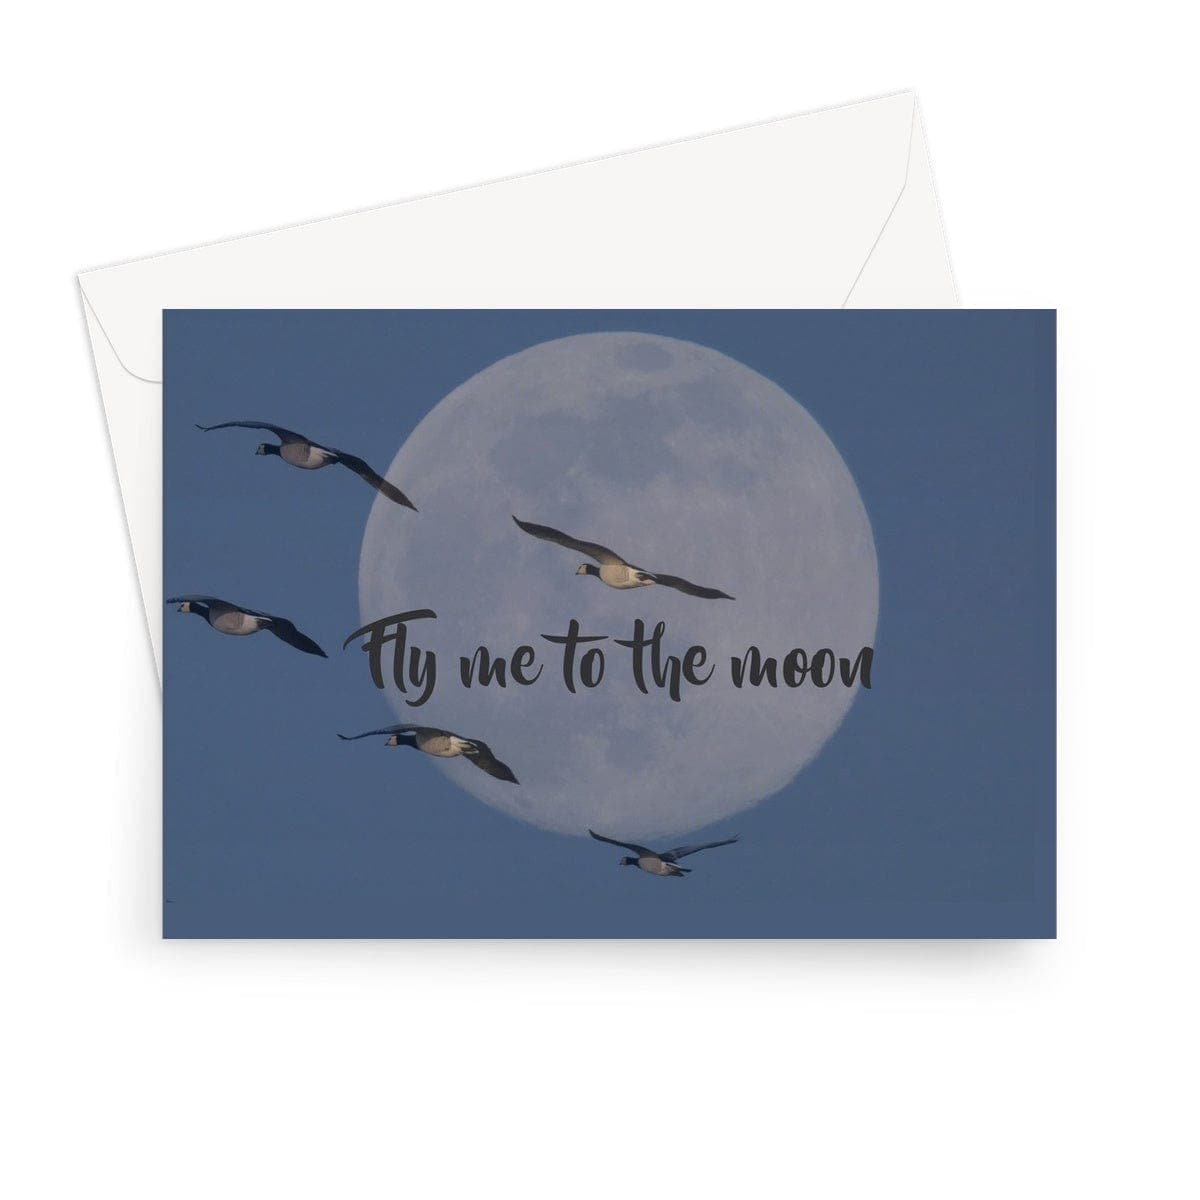 Fly me to the moon, Art on a Greeting Card, by Sensus Studio